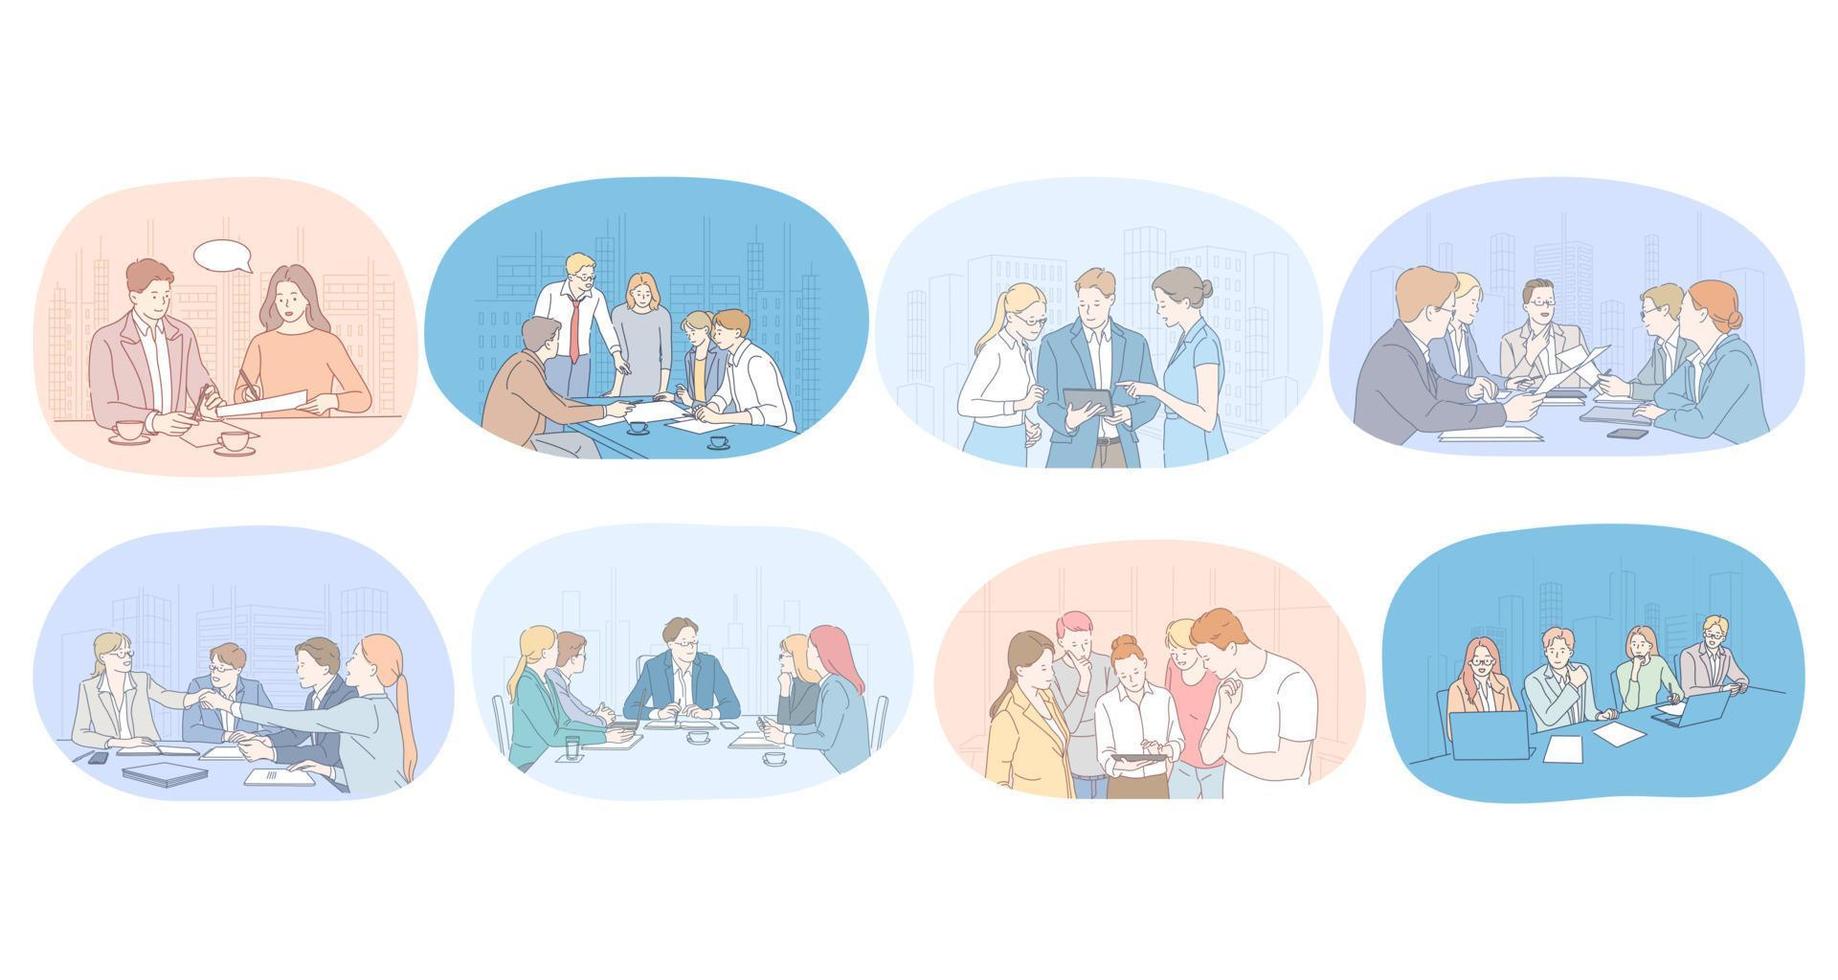 Communication, business, teamwork, brainstorming, presentation, agreement concept. Business people partners coworkers cartoon characters discussing projects, having brainstorming, negotiating vector